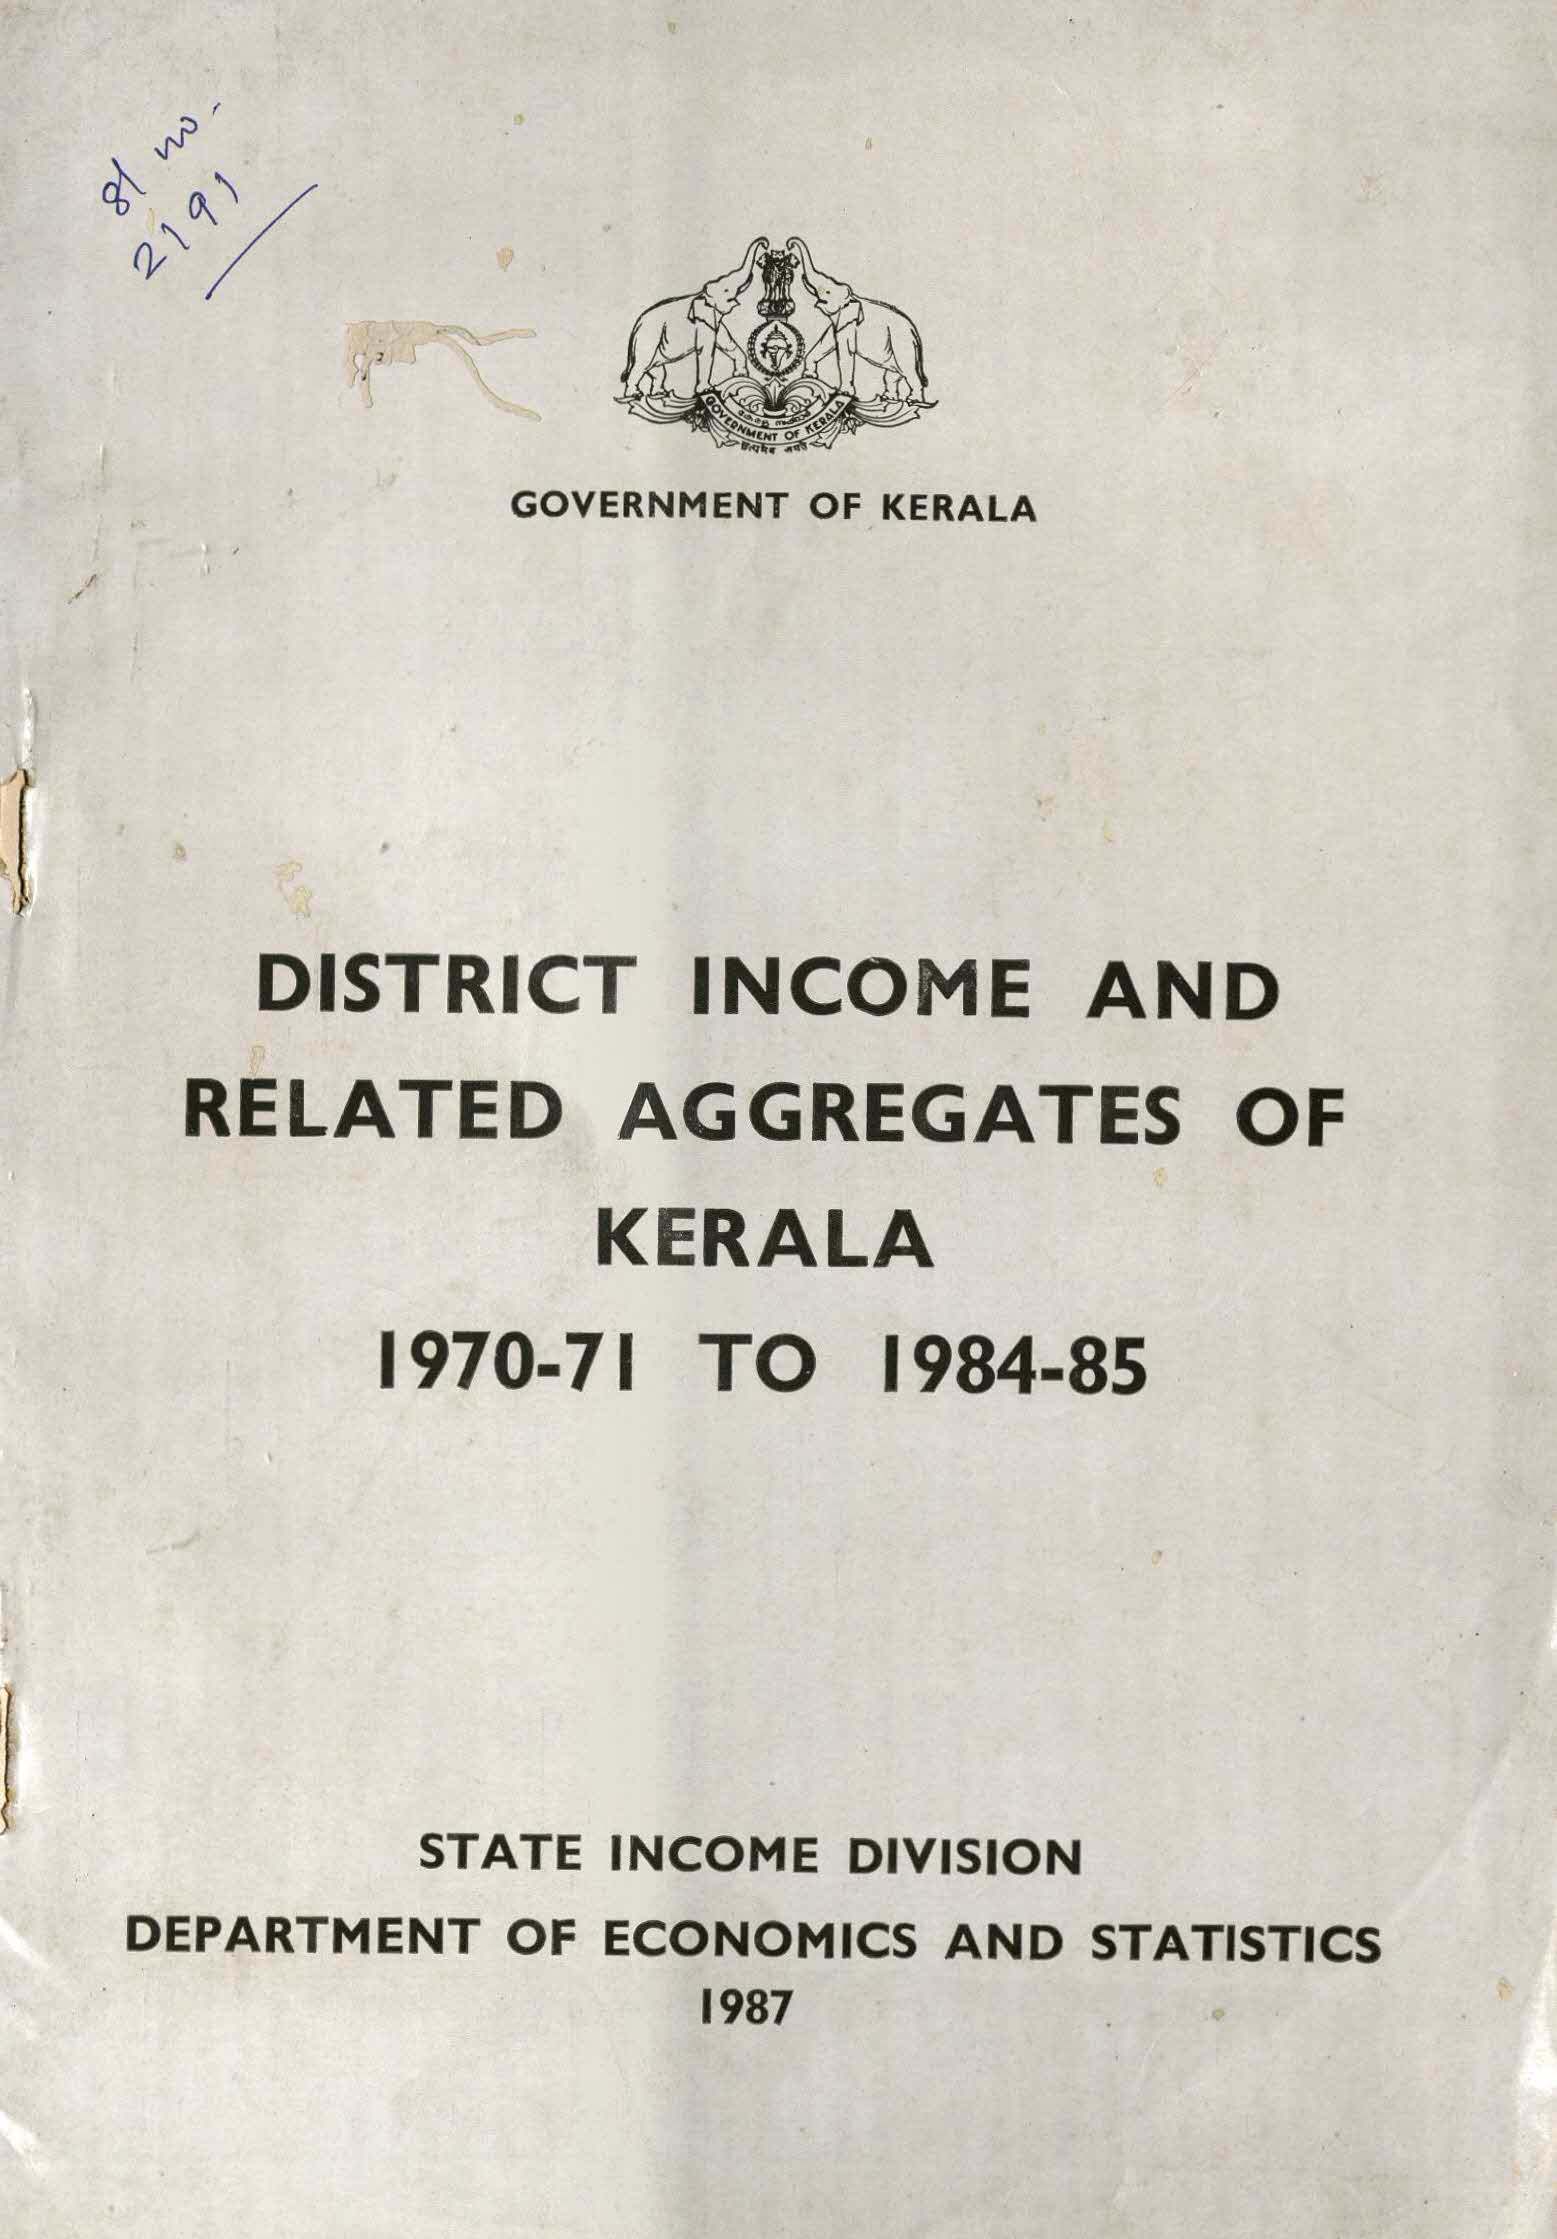 District Income And Related Aggregates Of Kerala 1970-71 To 1984-85